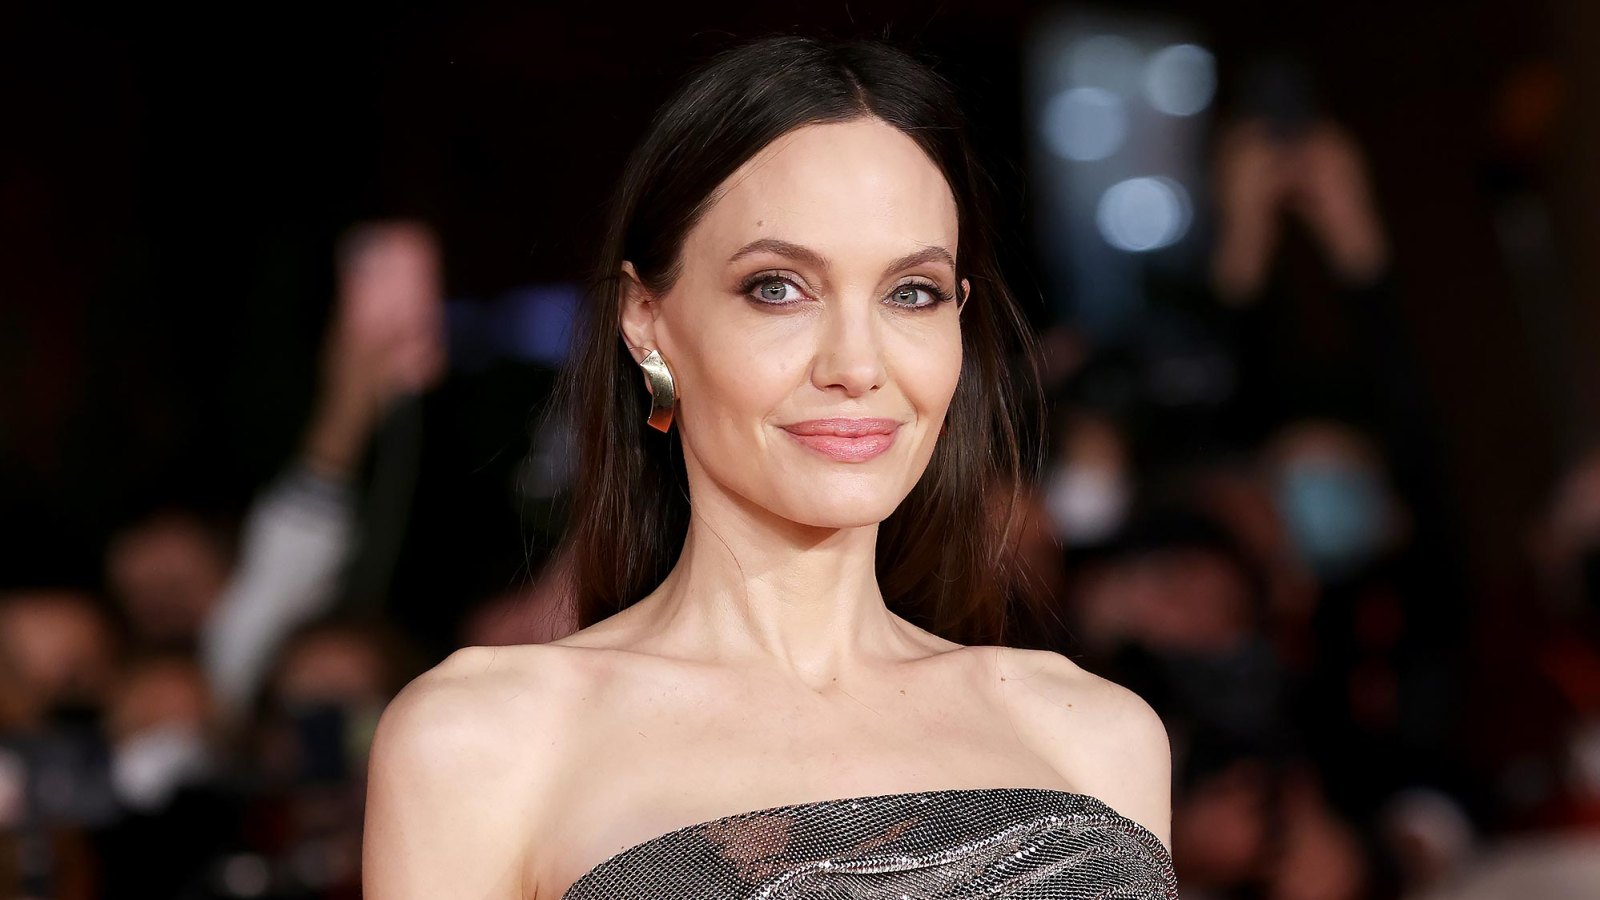 Angelina Jolie is launching her own fashion brand